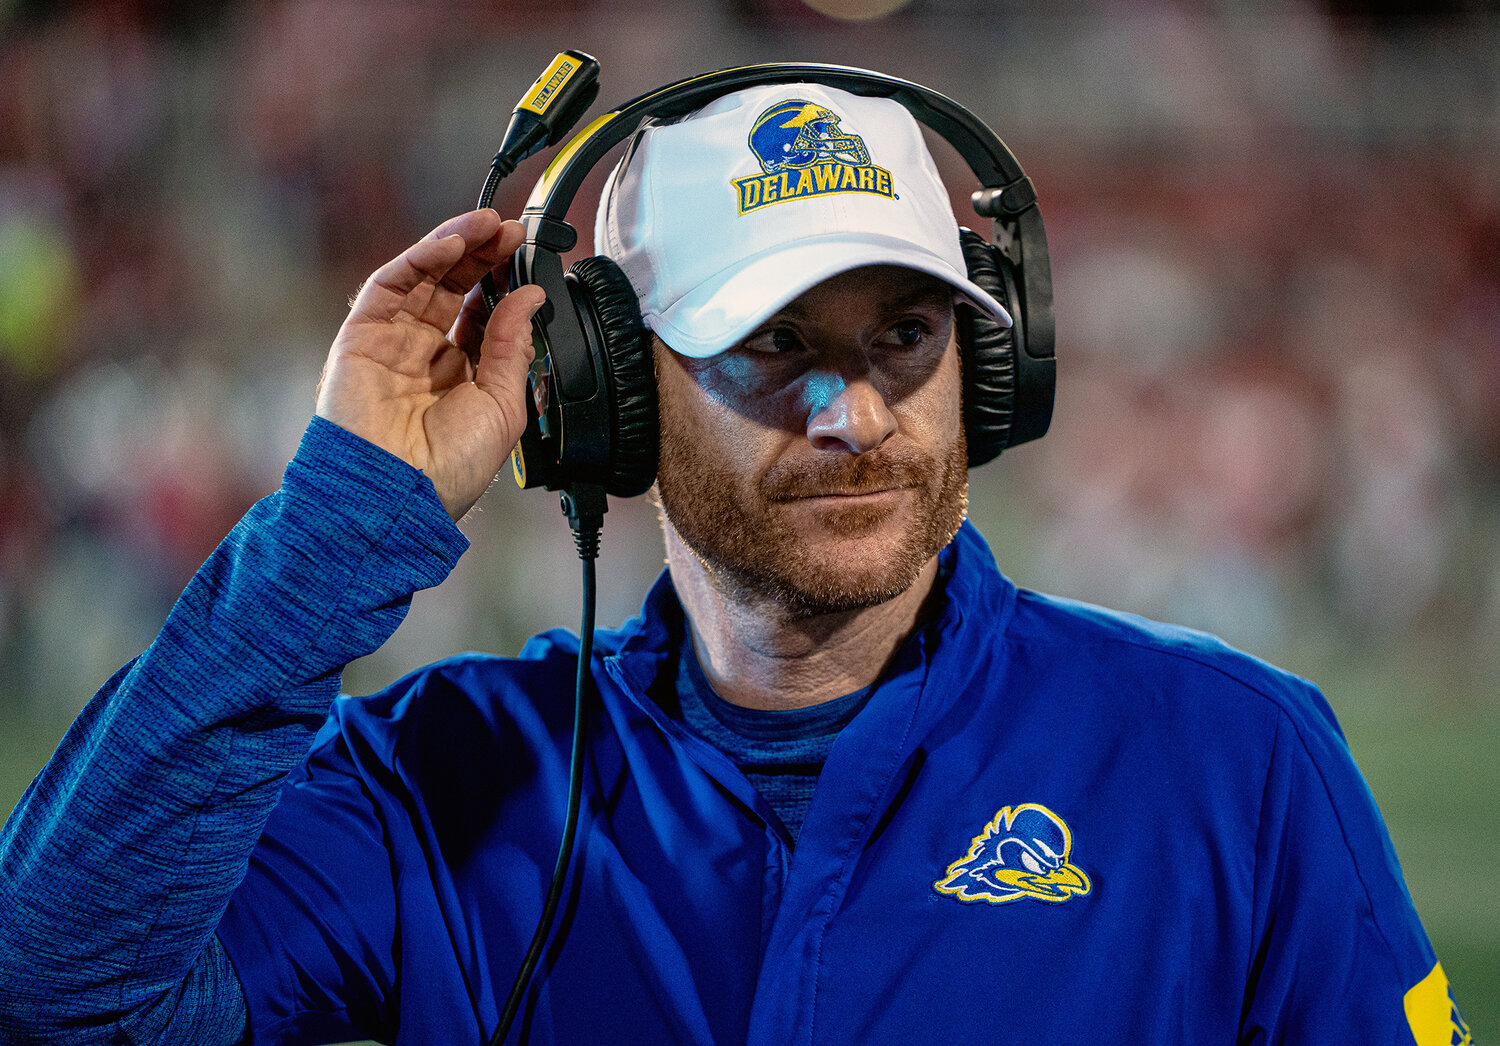 Delaware coach Ryan Carty on the sidelines in the Blue Hens' season-opening win at Stony Brook. University of Delaware Athletics photo.